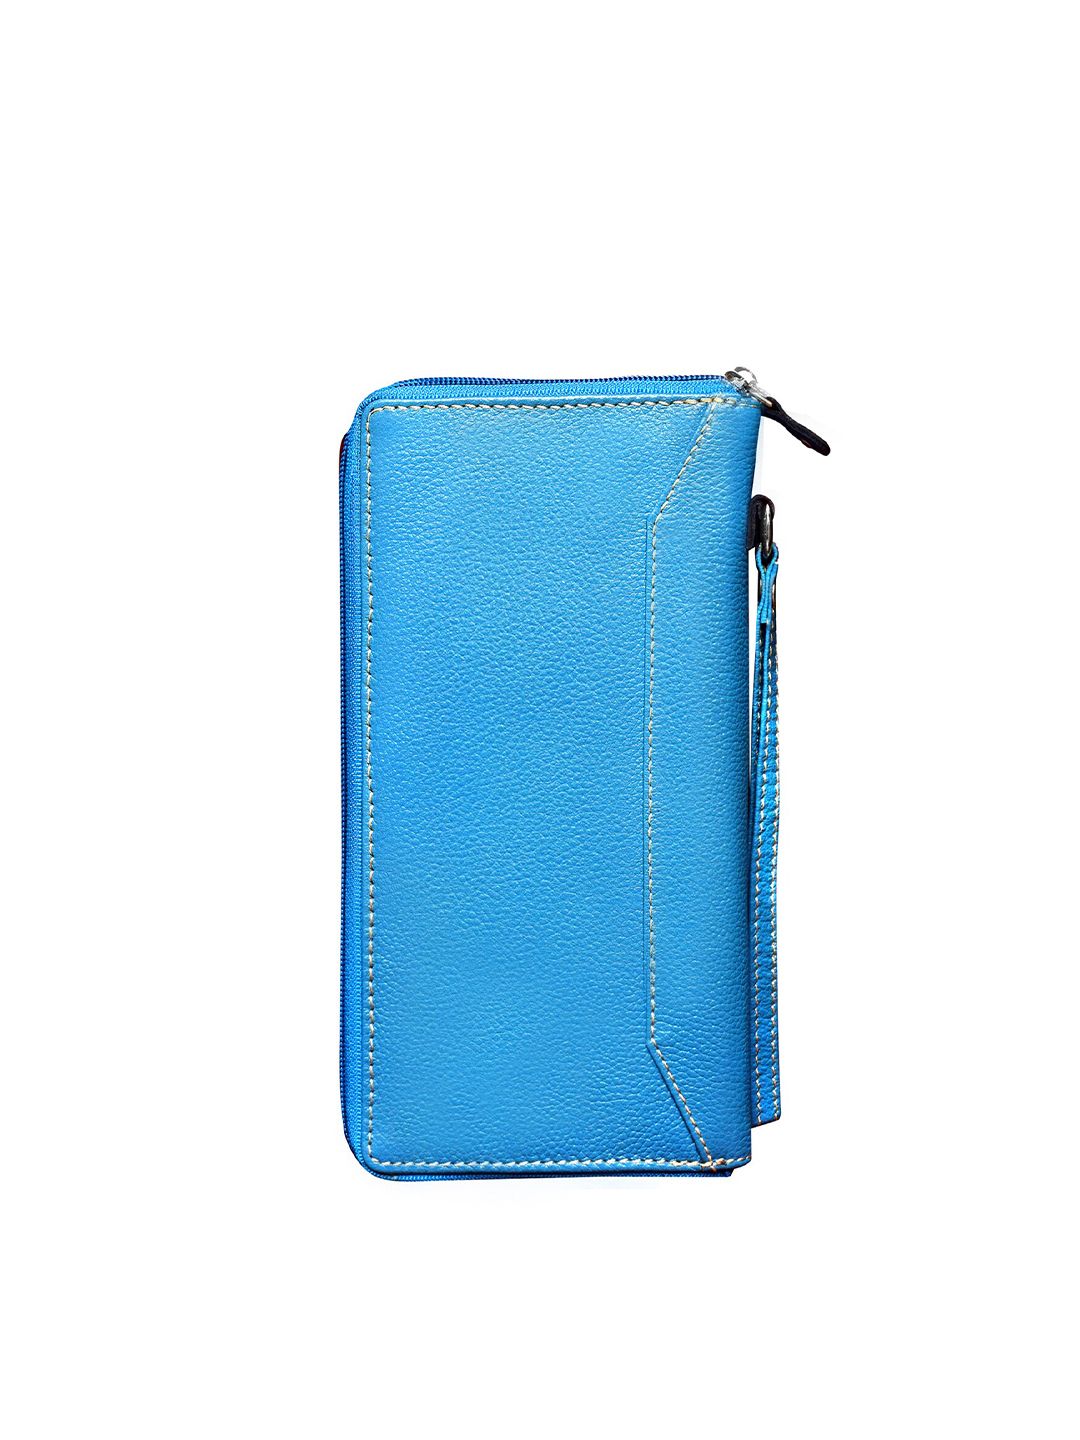 ABYS Unisex Blue Textured Leather Passport Holder Price in India